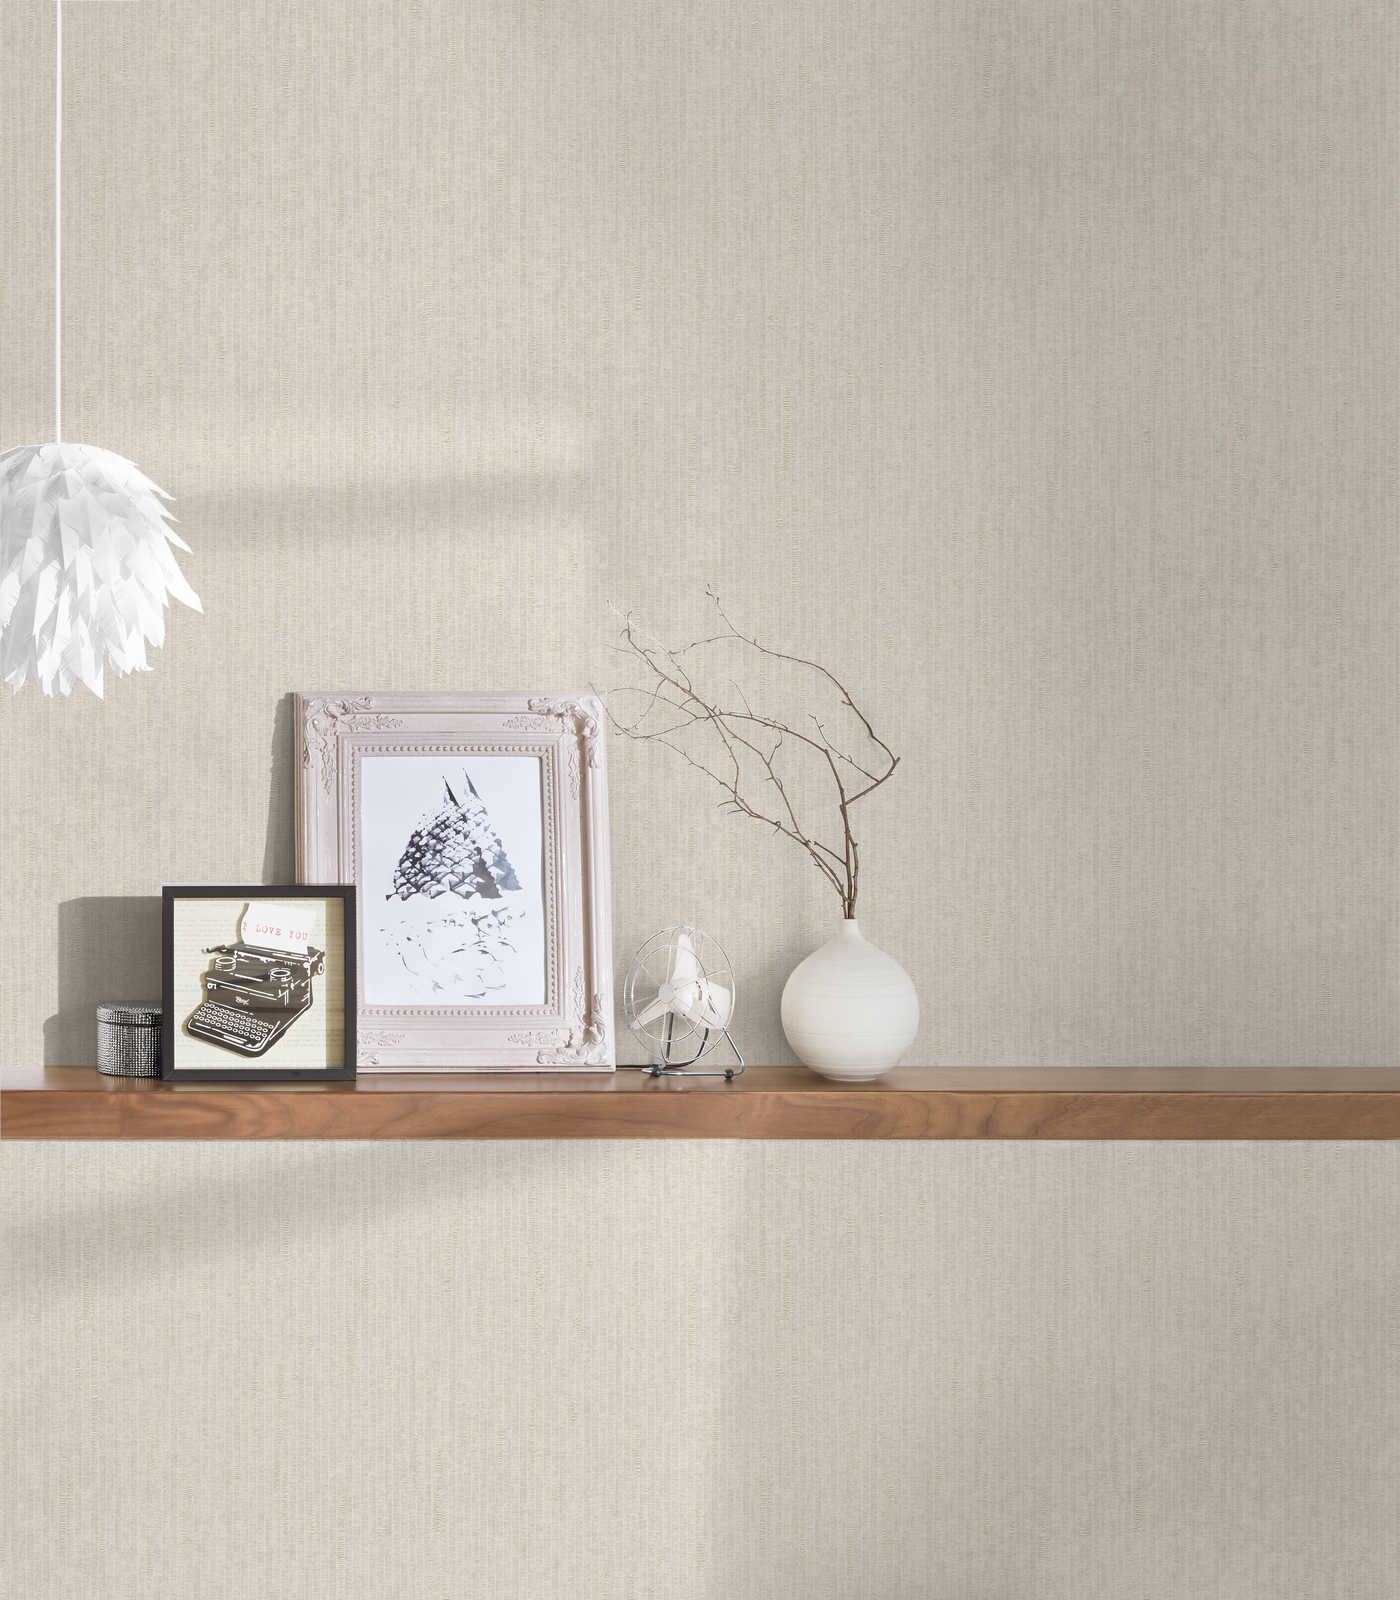             Cream white wallpaper with shimmer effect and textile look - white
        